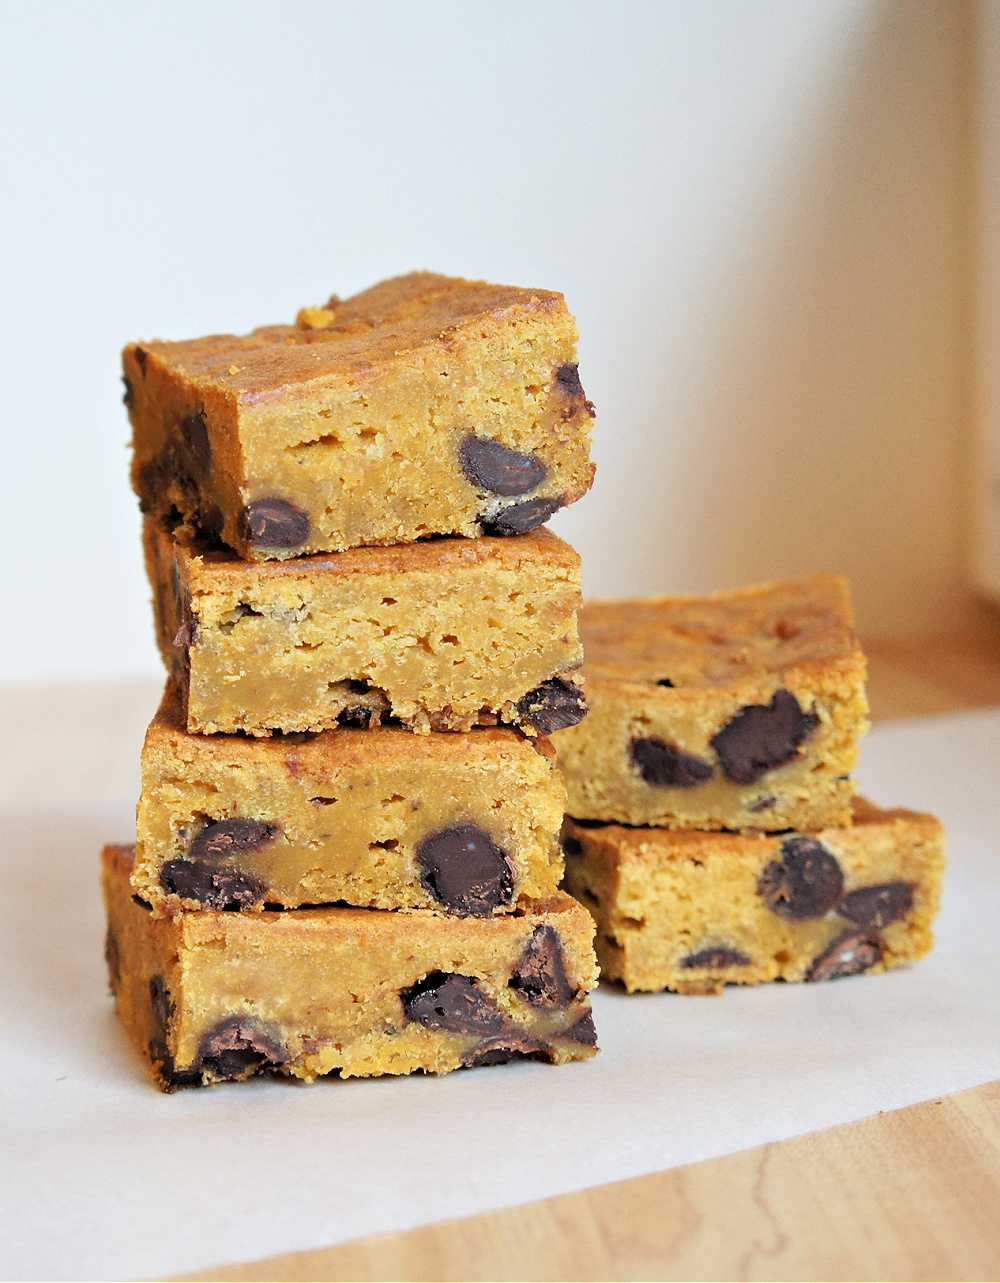 libby's pumkpin bars filled with chocolate chips